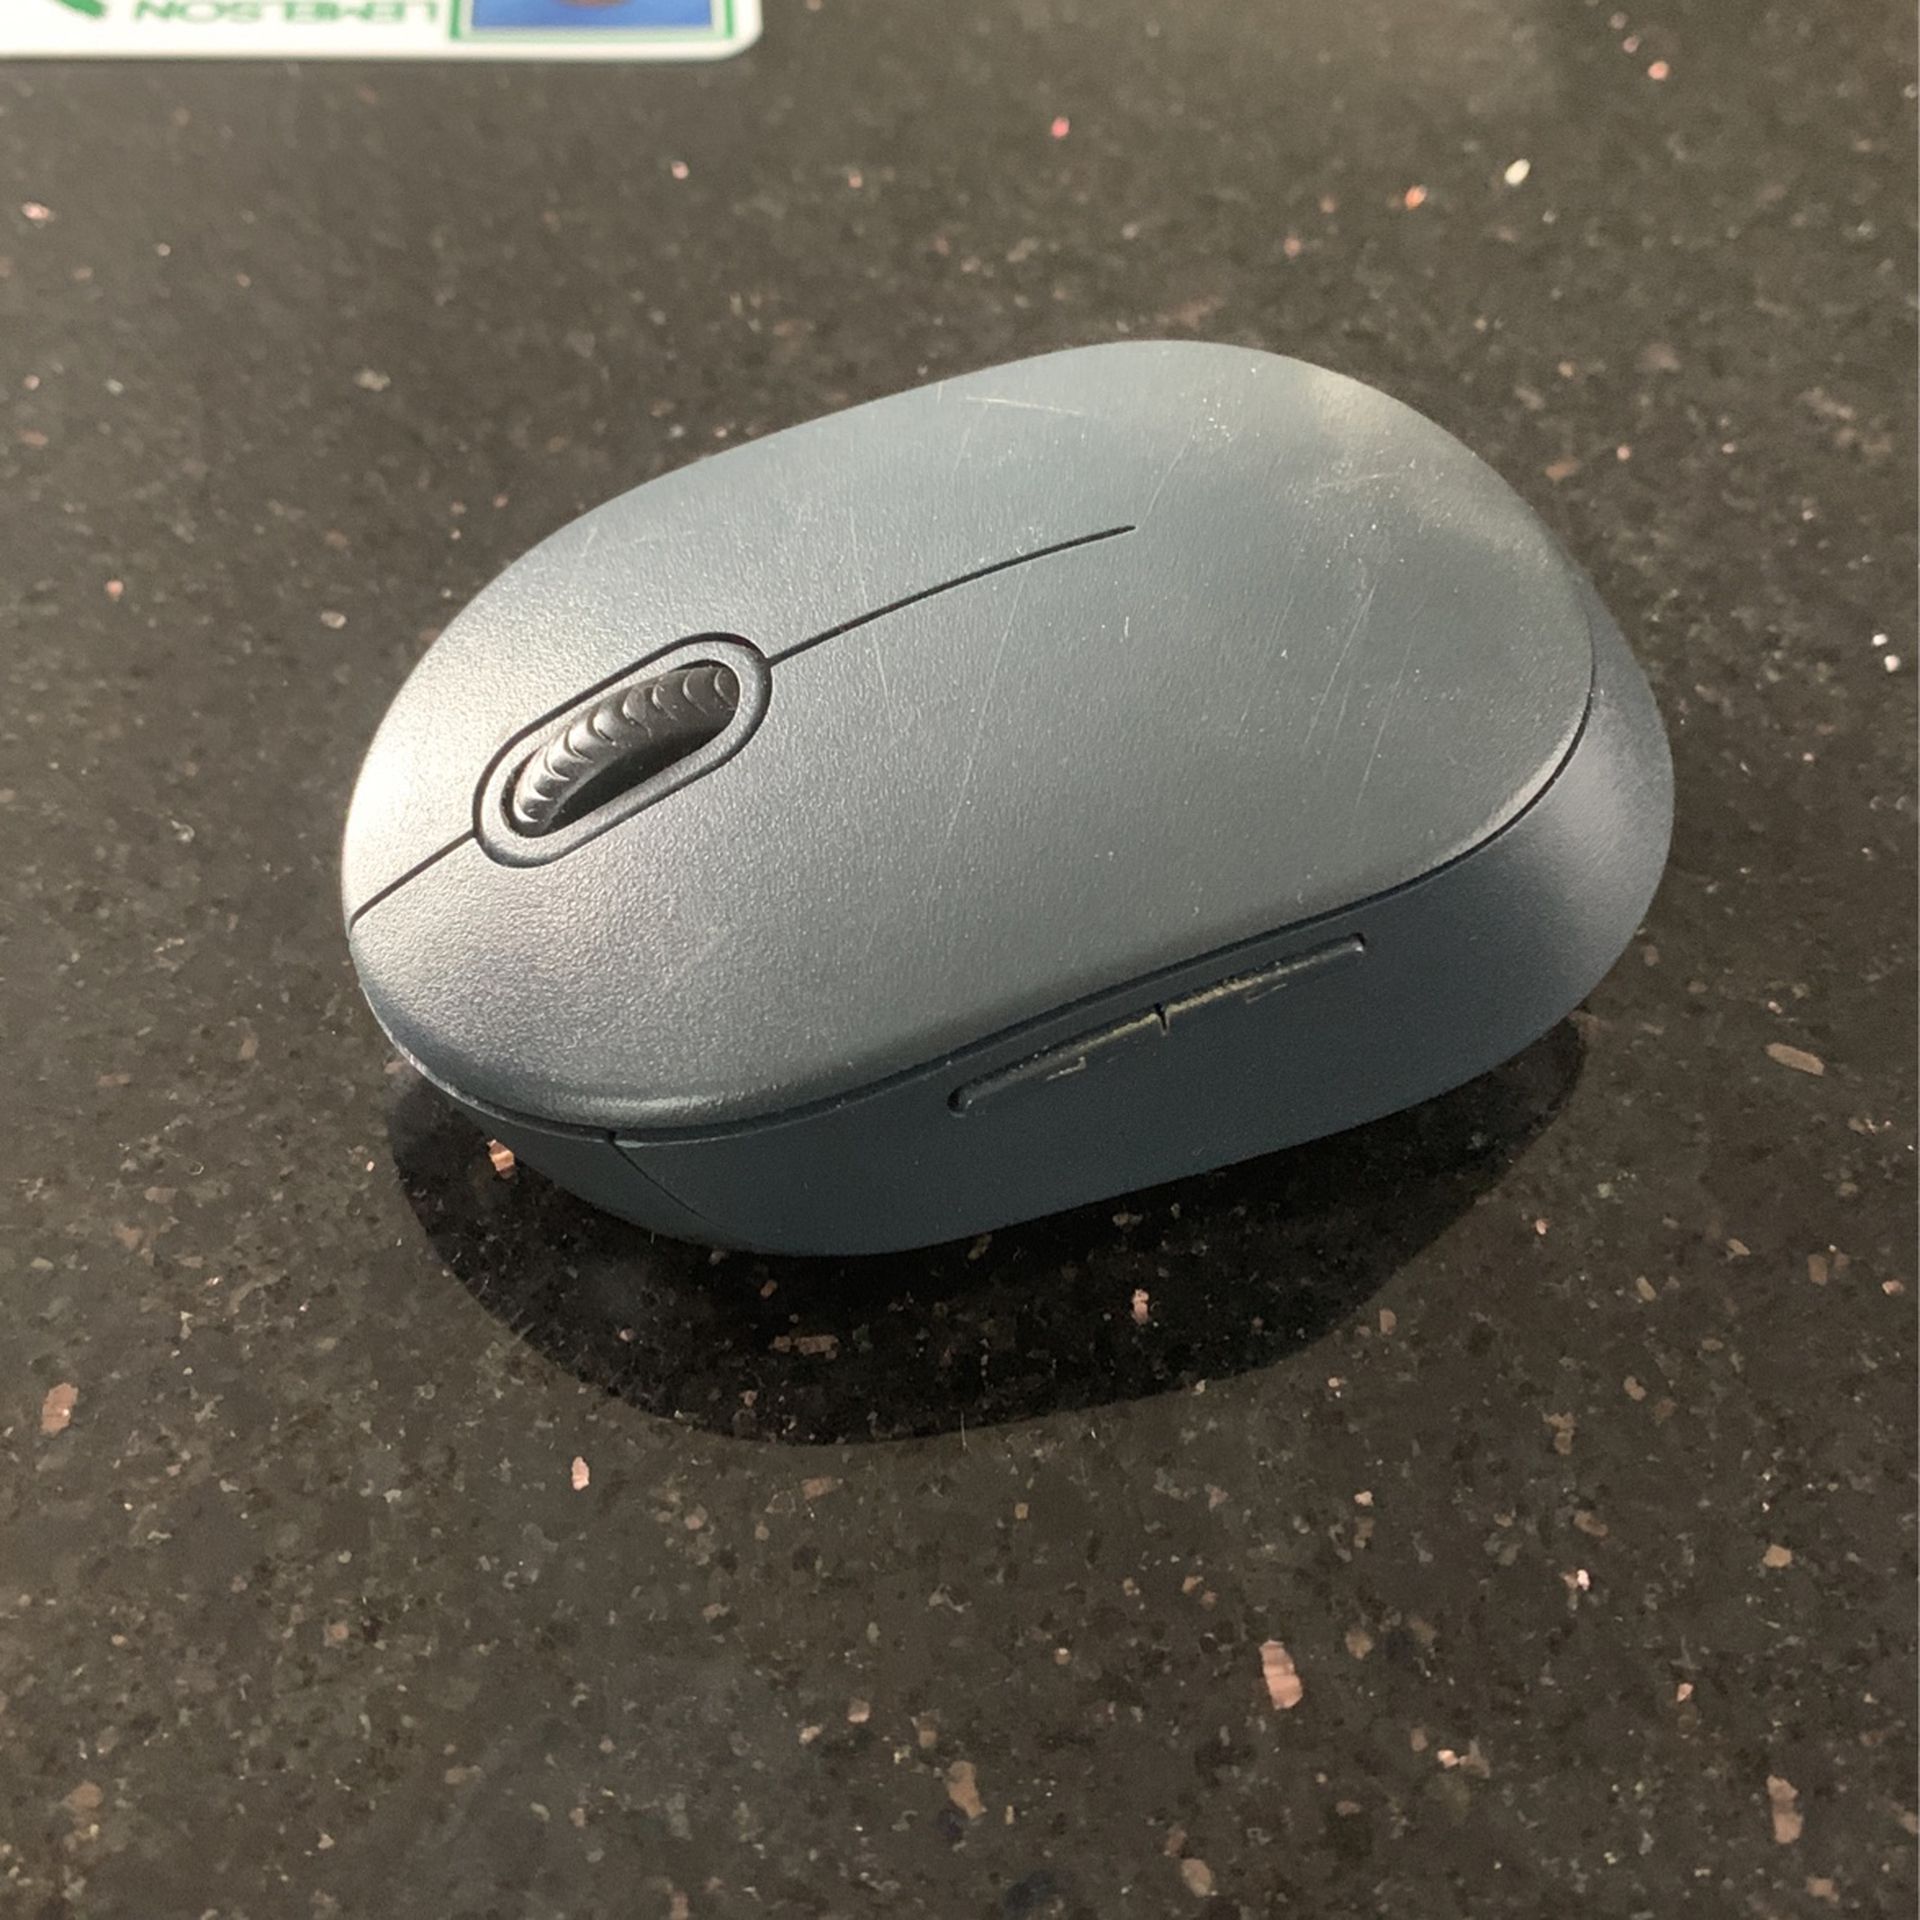 Onn Gray wireless mouse, well used